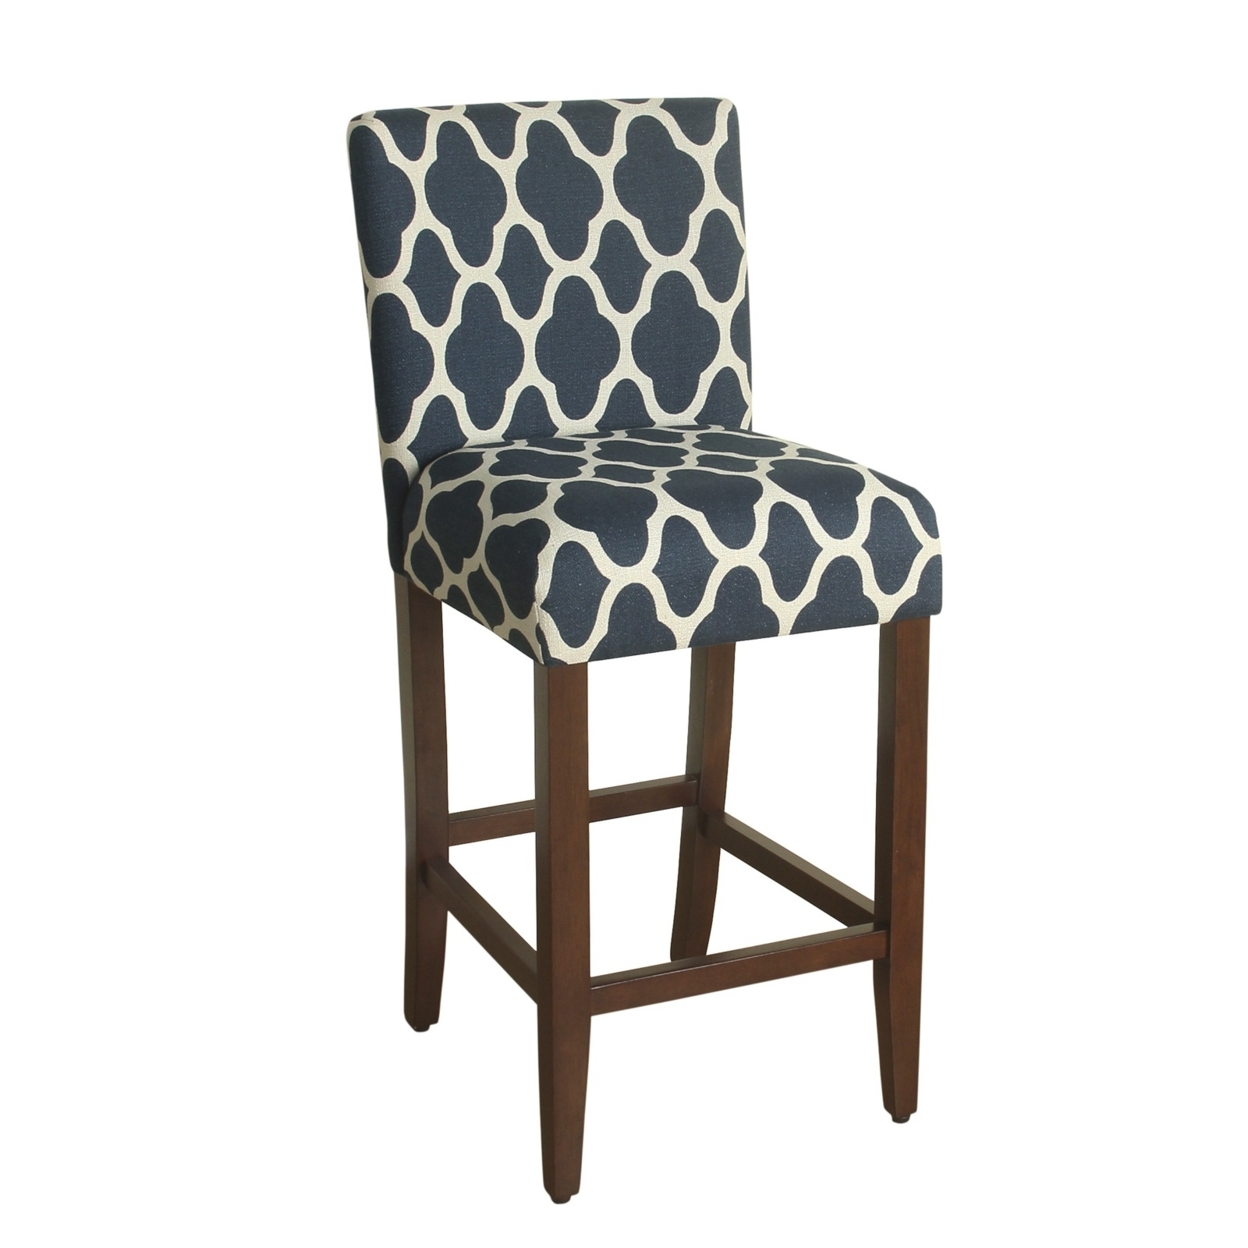 Wooden 29 Inch Counter Height Stool With Quatrefoil Pattern Fabric Upholstery, Blue And White- Saltoro Sherpi